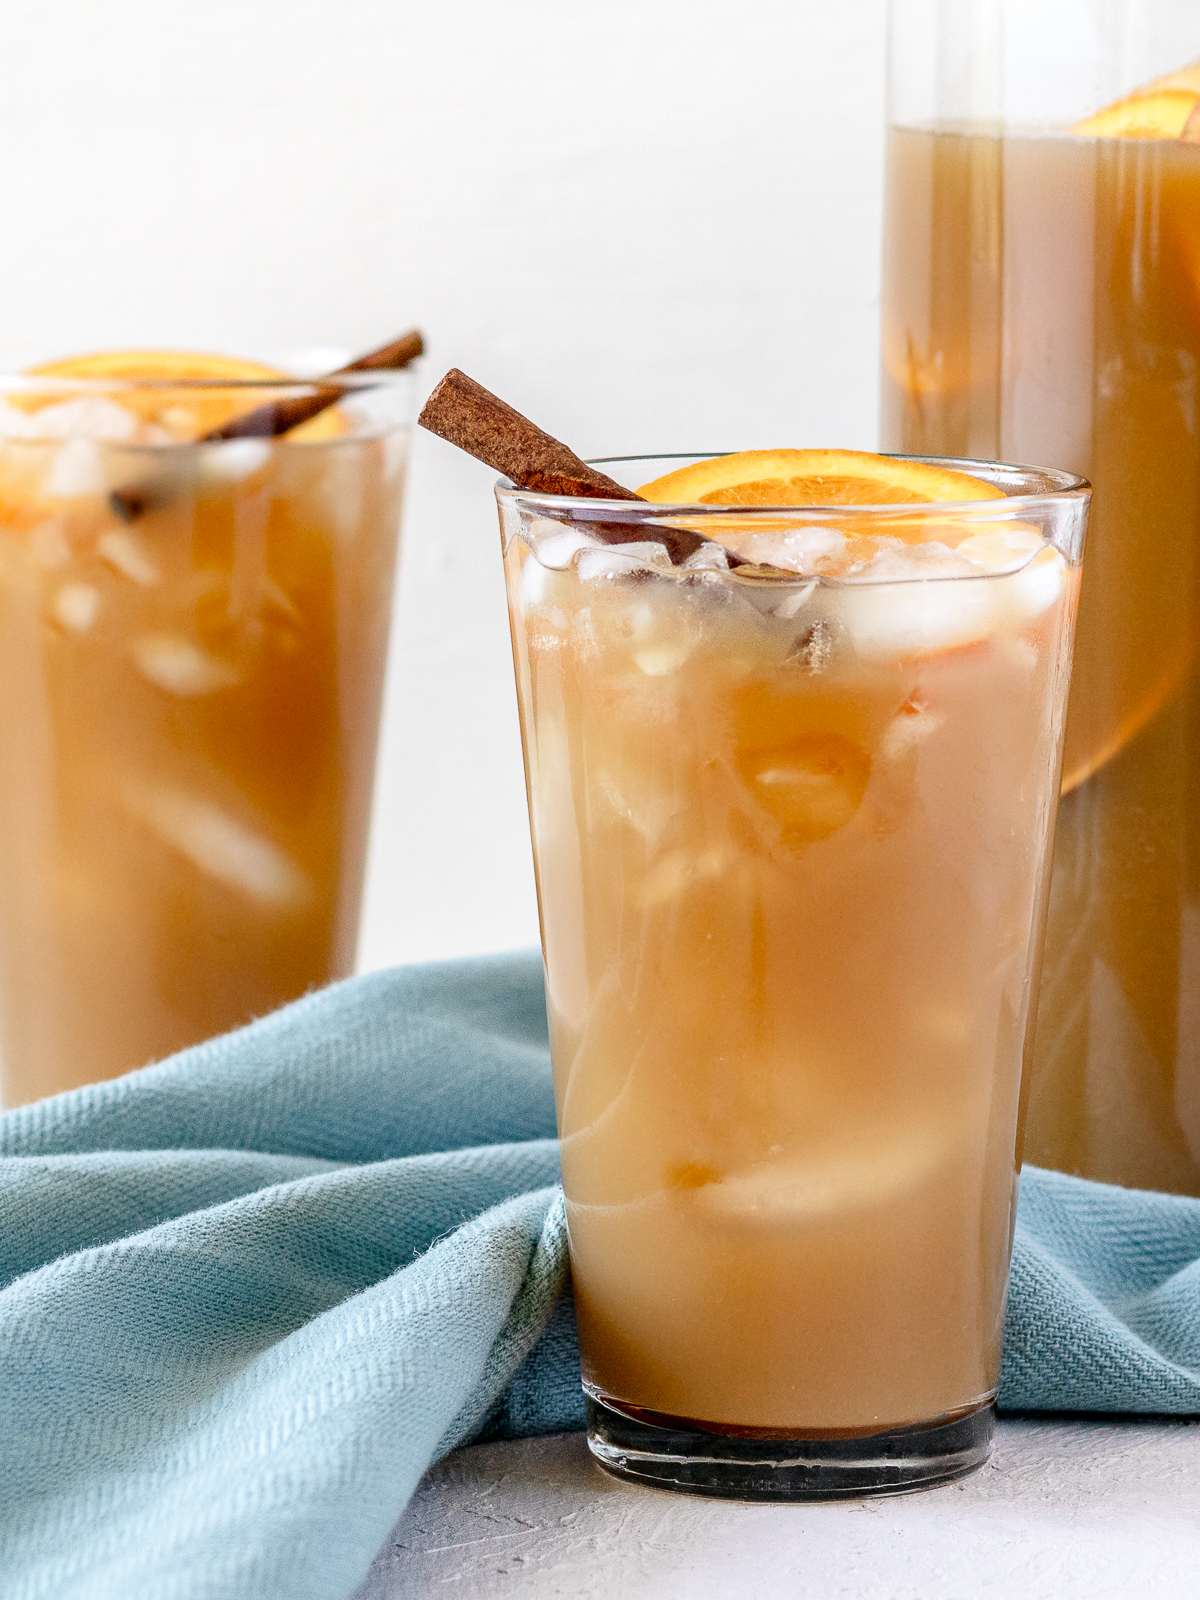 Glasses of ice filled with non alcoholic sweet tea harvest punch. Garnished with an orange slice and cinnamon stick.